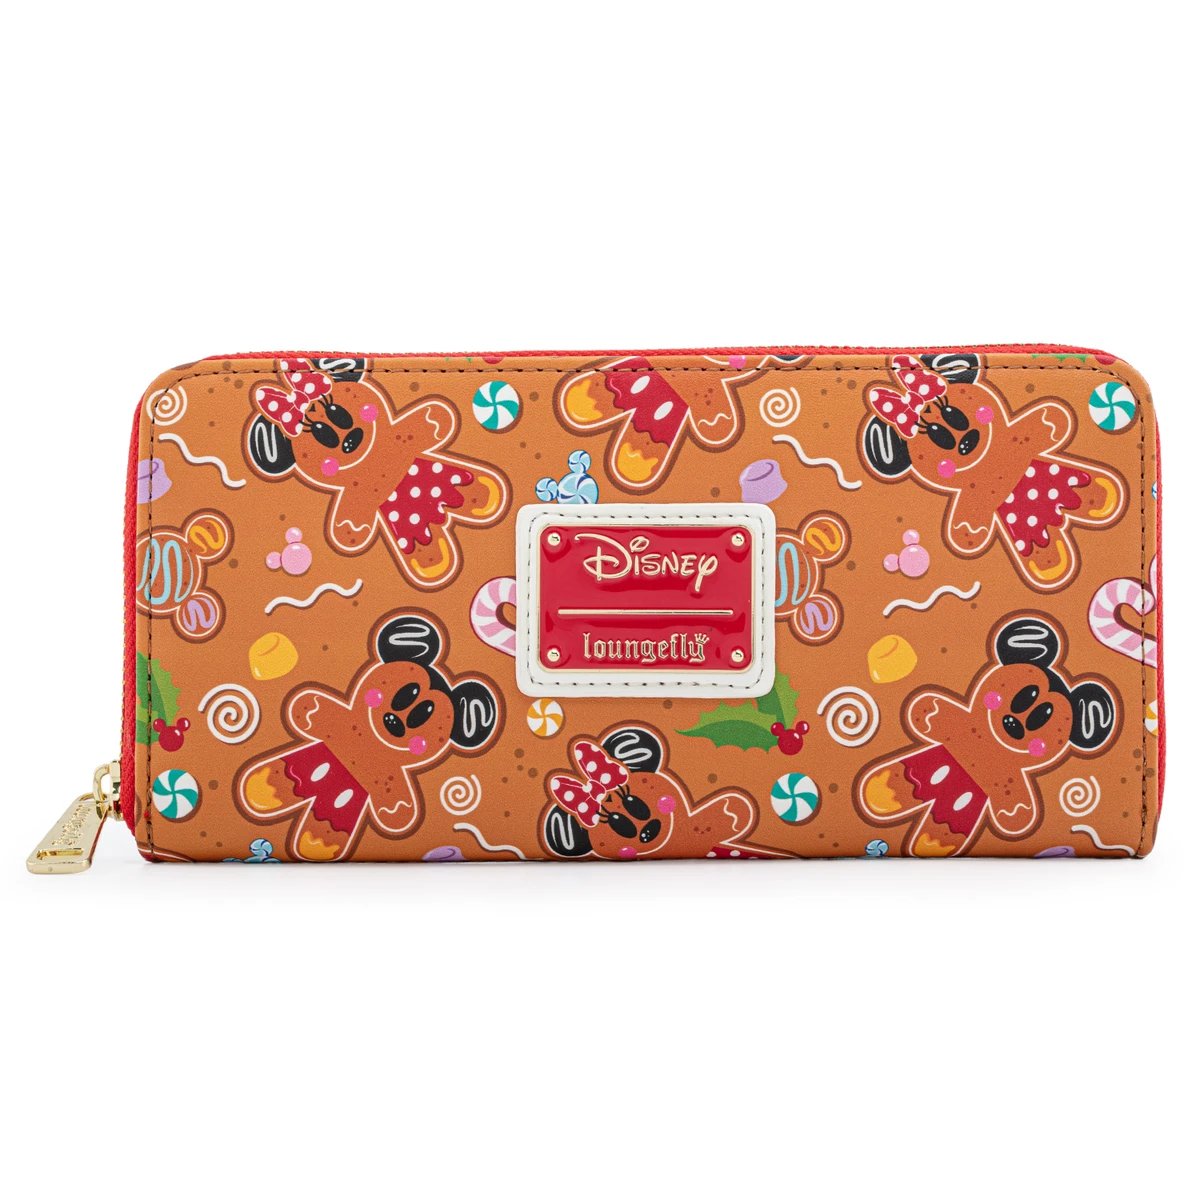 Loungefly Disney Gingerbread Allover Print Zip-Around Wallet Front